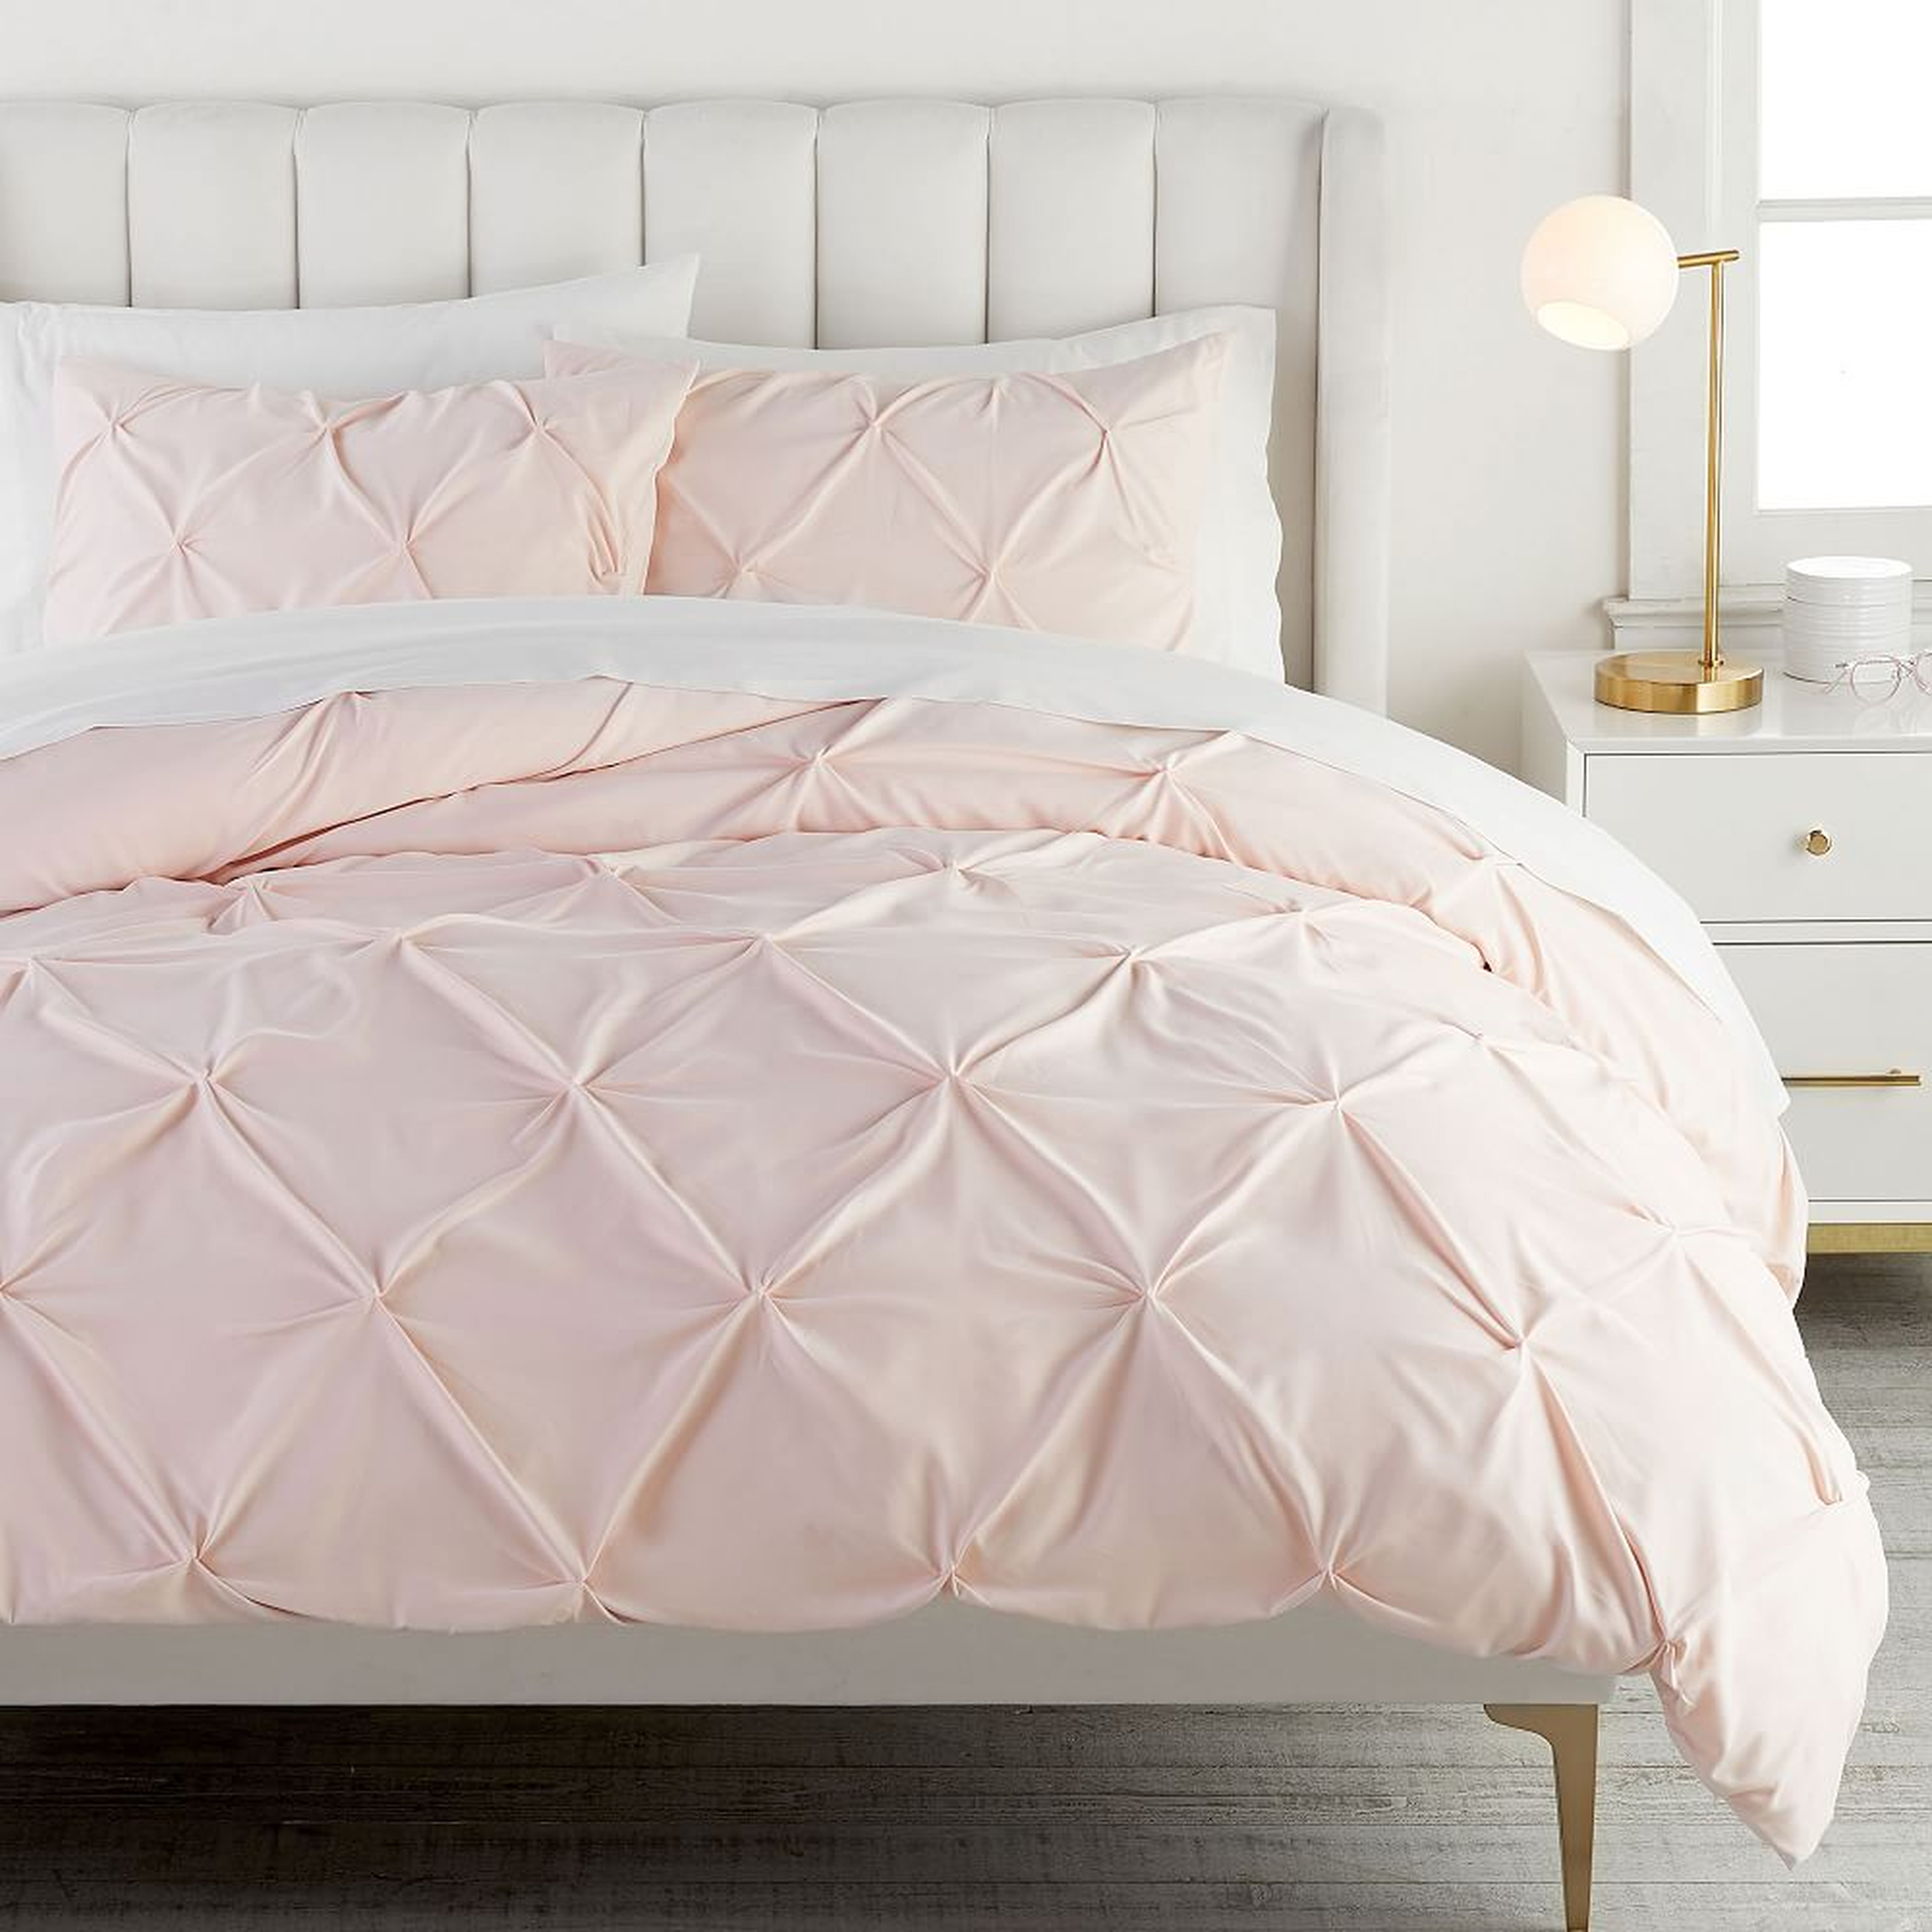 Recycled Microfiber Pintuck Duvet Cover, Full/Queen, Powdered Blush - Pottery Barn Teen